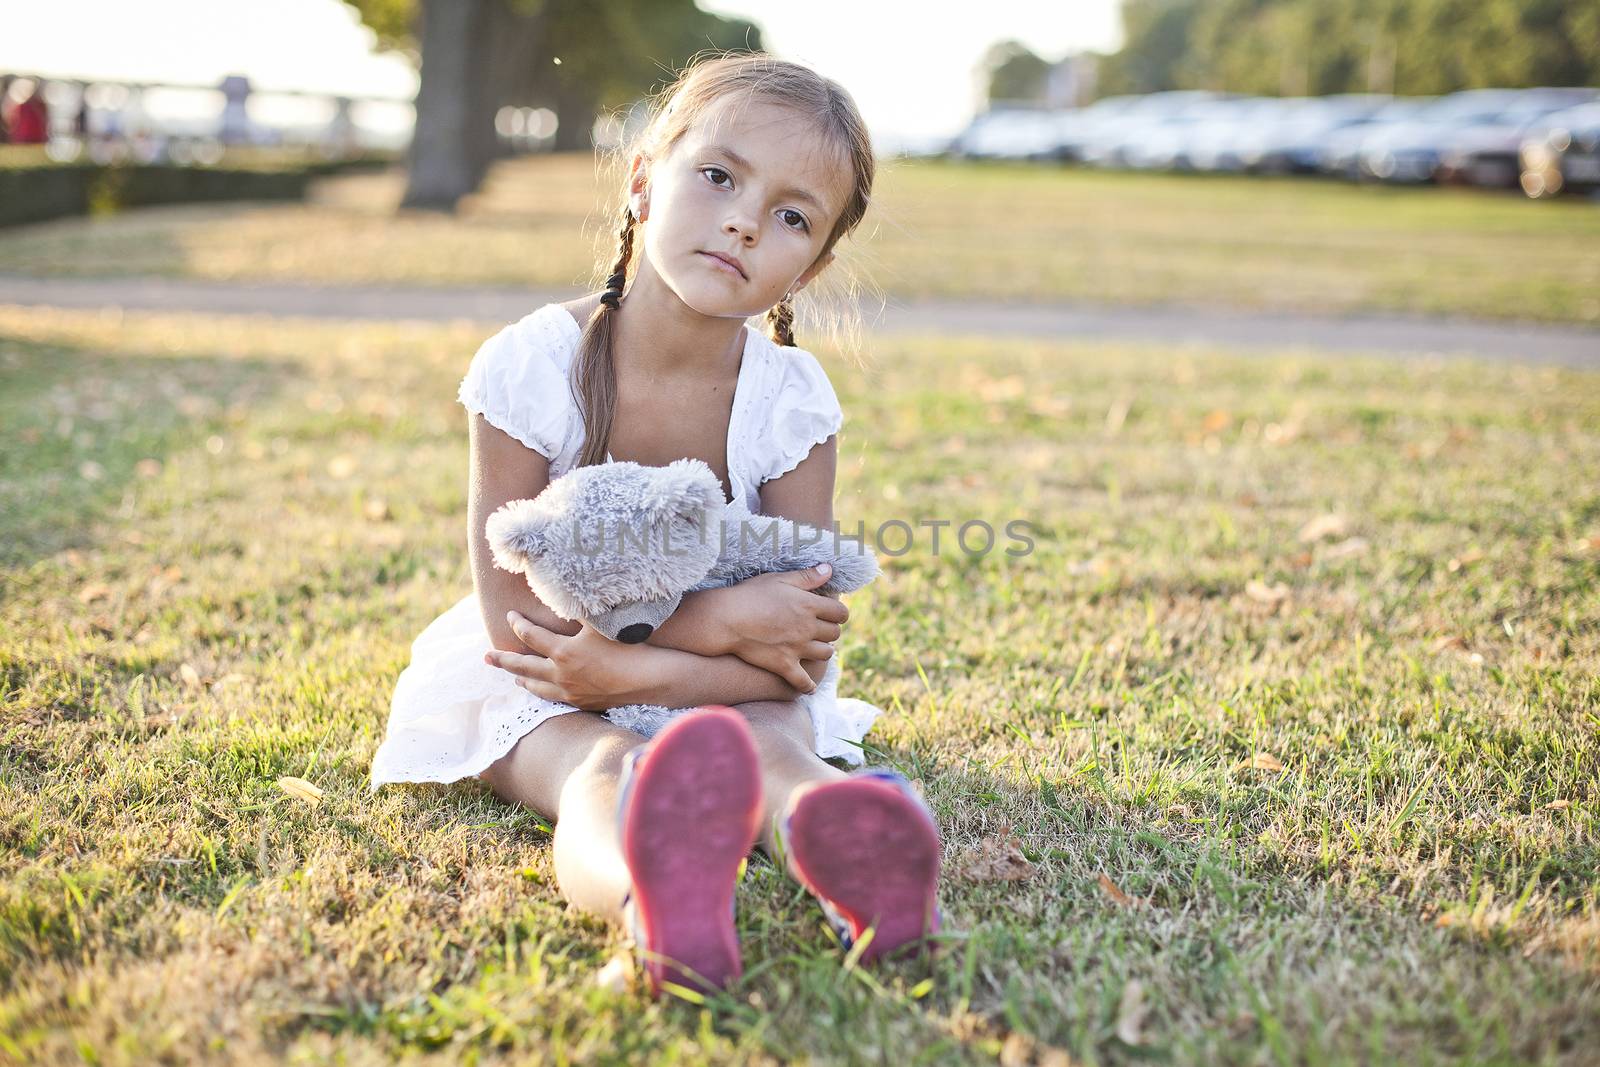 Young lonely girl sit on a grass in a park with her toy teddy bear